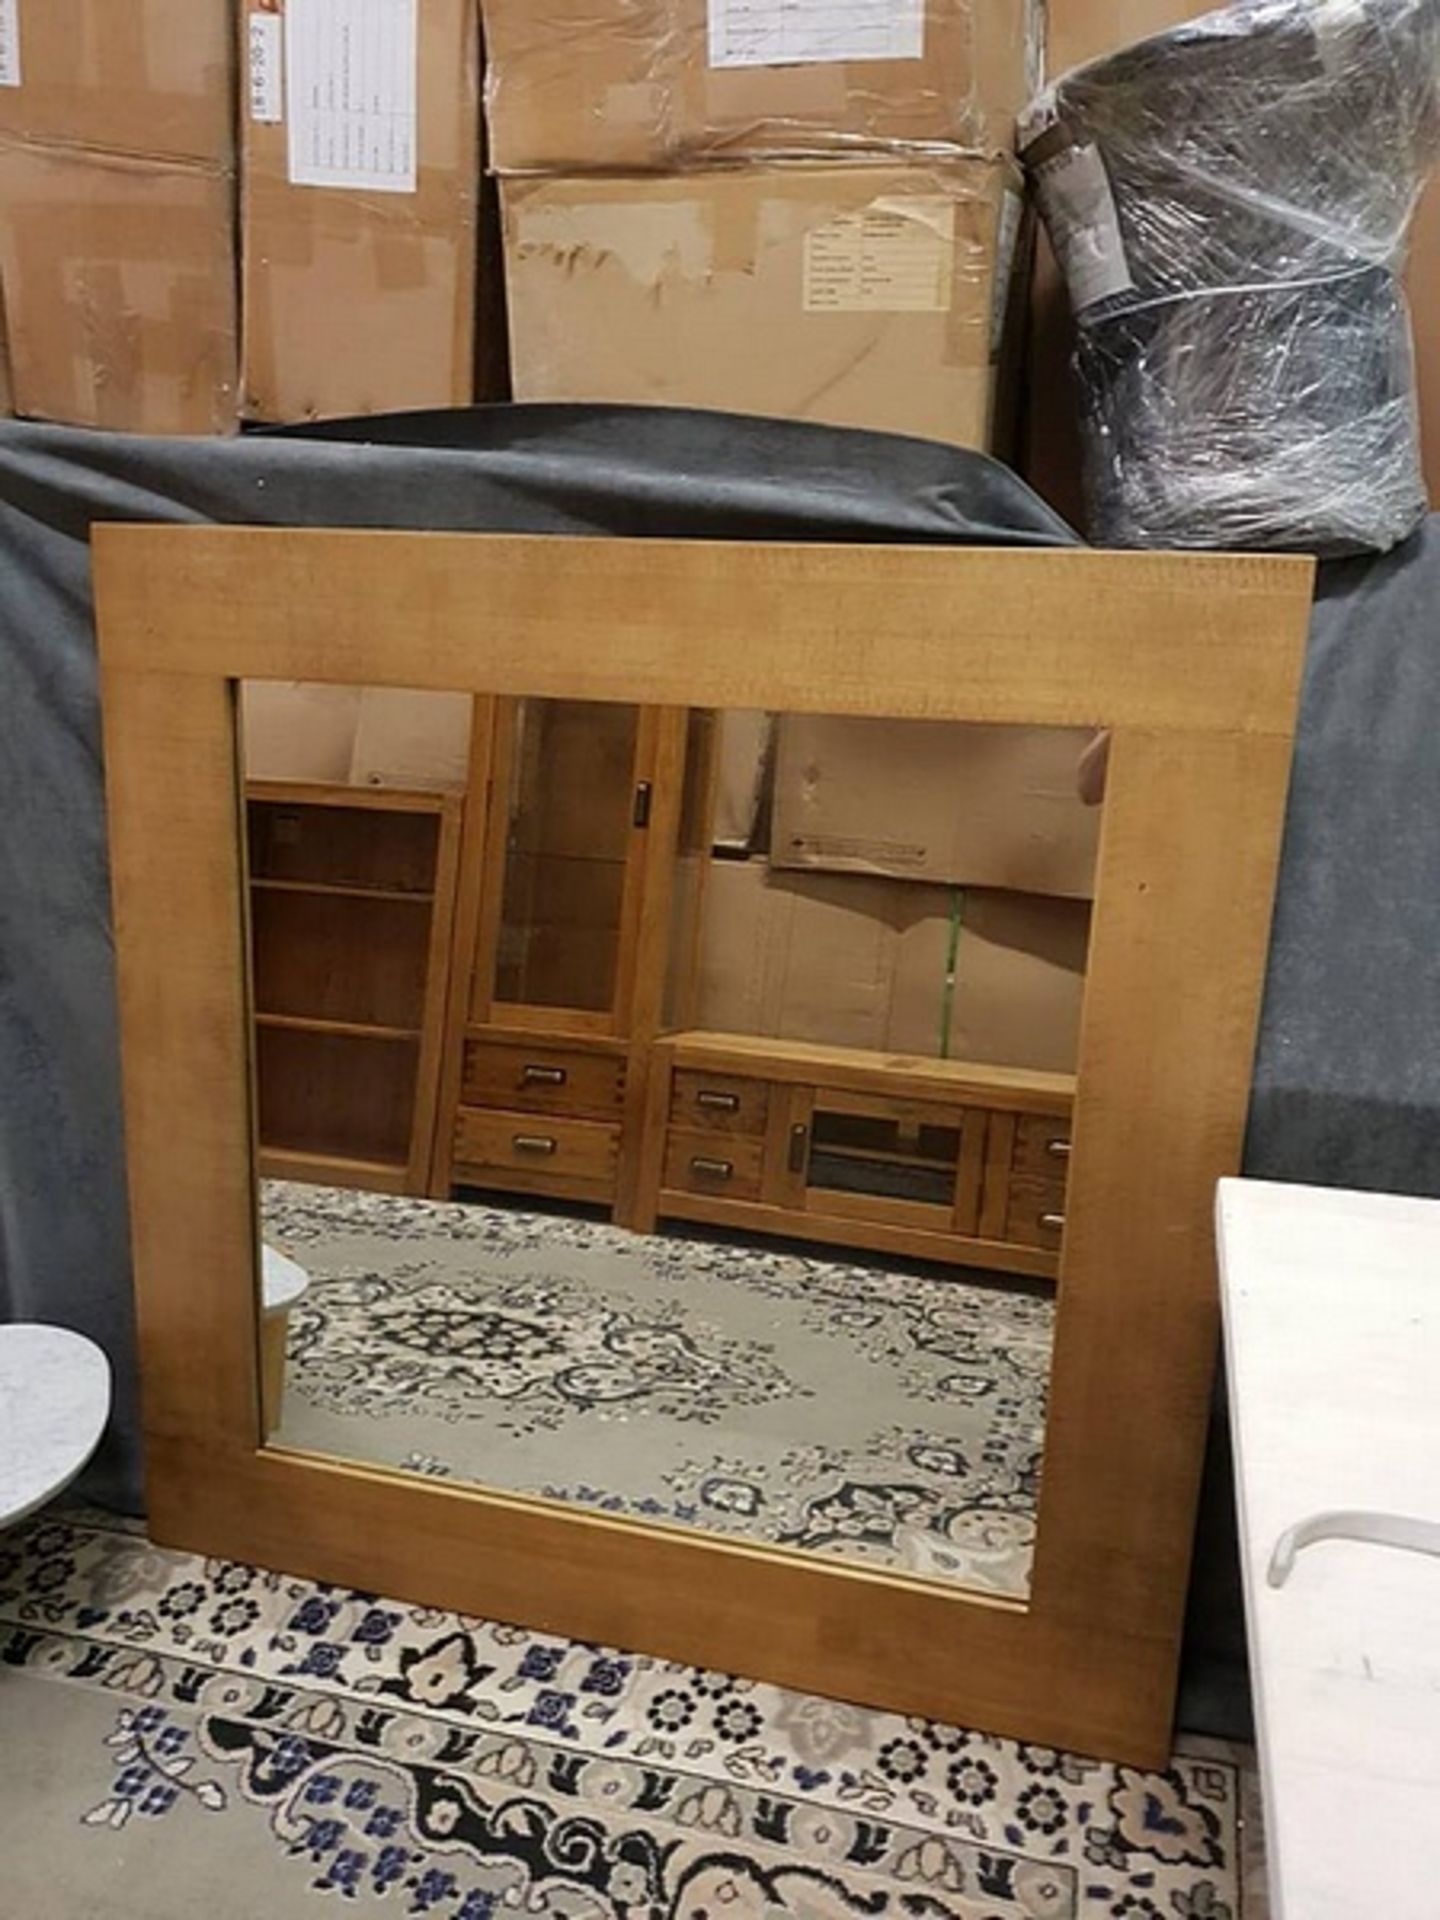 Marbello Rustic Wood Square Mirror To Inspire A Natural Look This Mirrors Rustic Frame Is Crafted